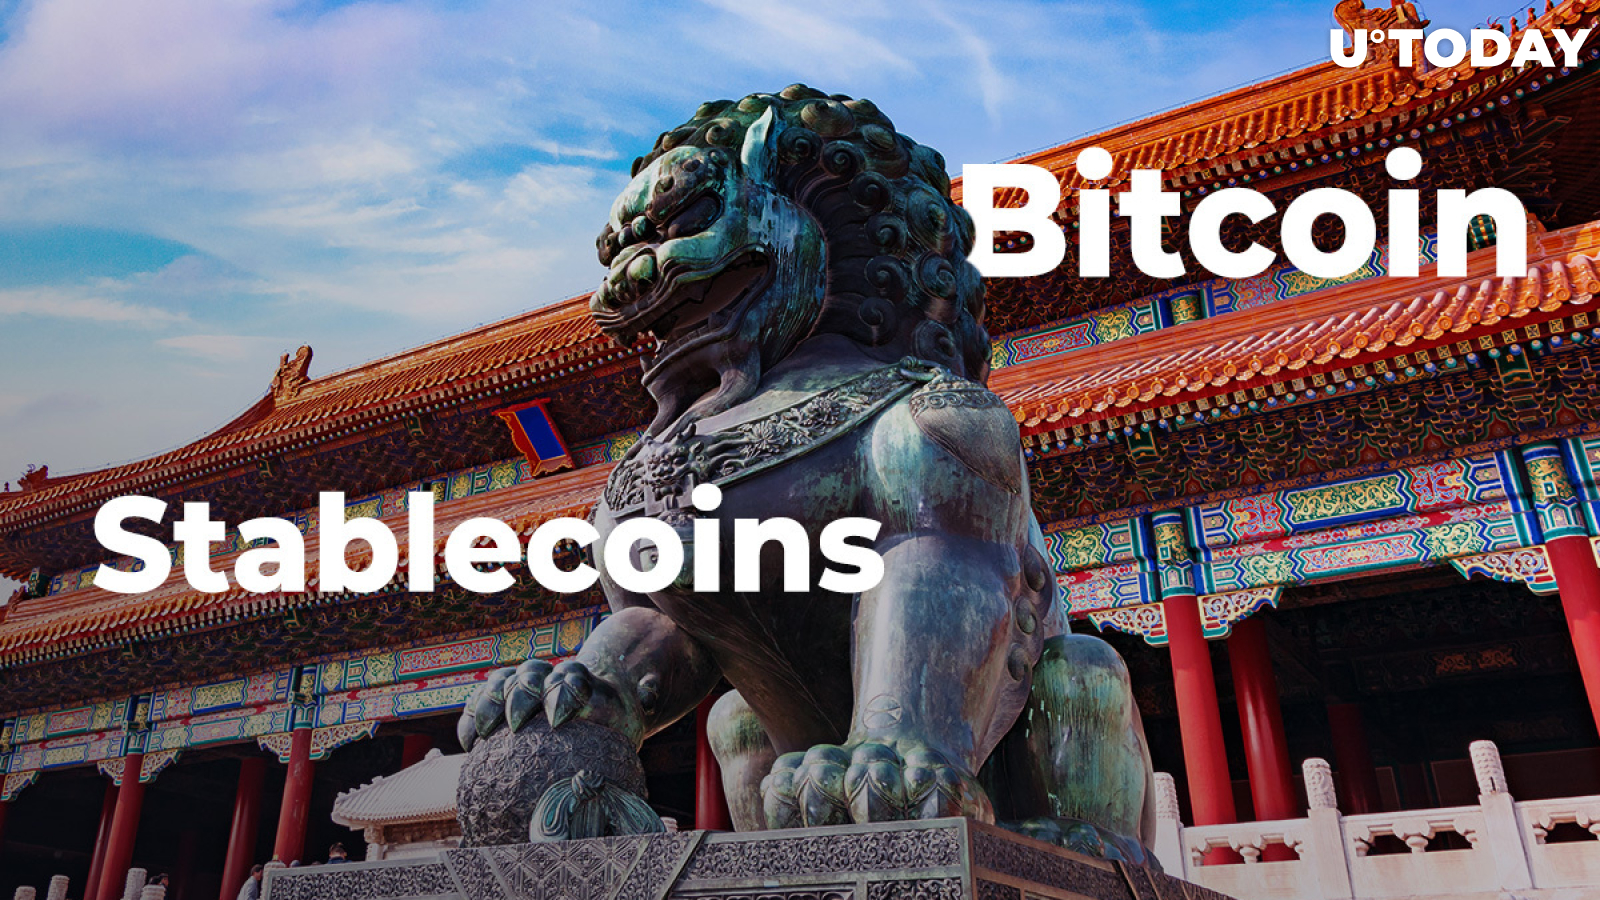 Bitcoin and Stablecoins Expected to Facilitate Chinese Capital Flight as US-China Tensions Escalate